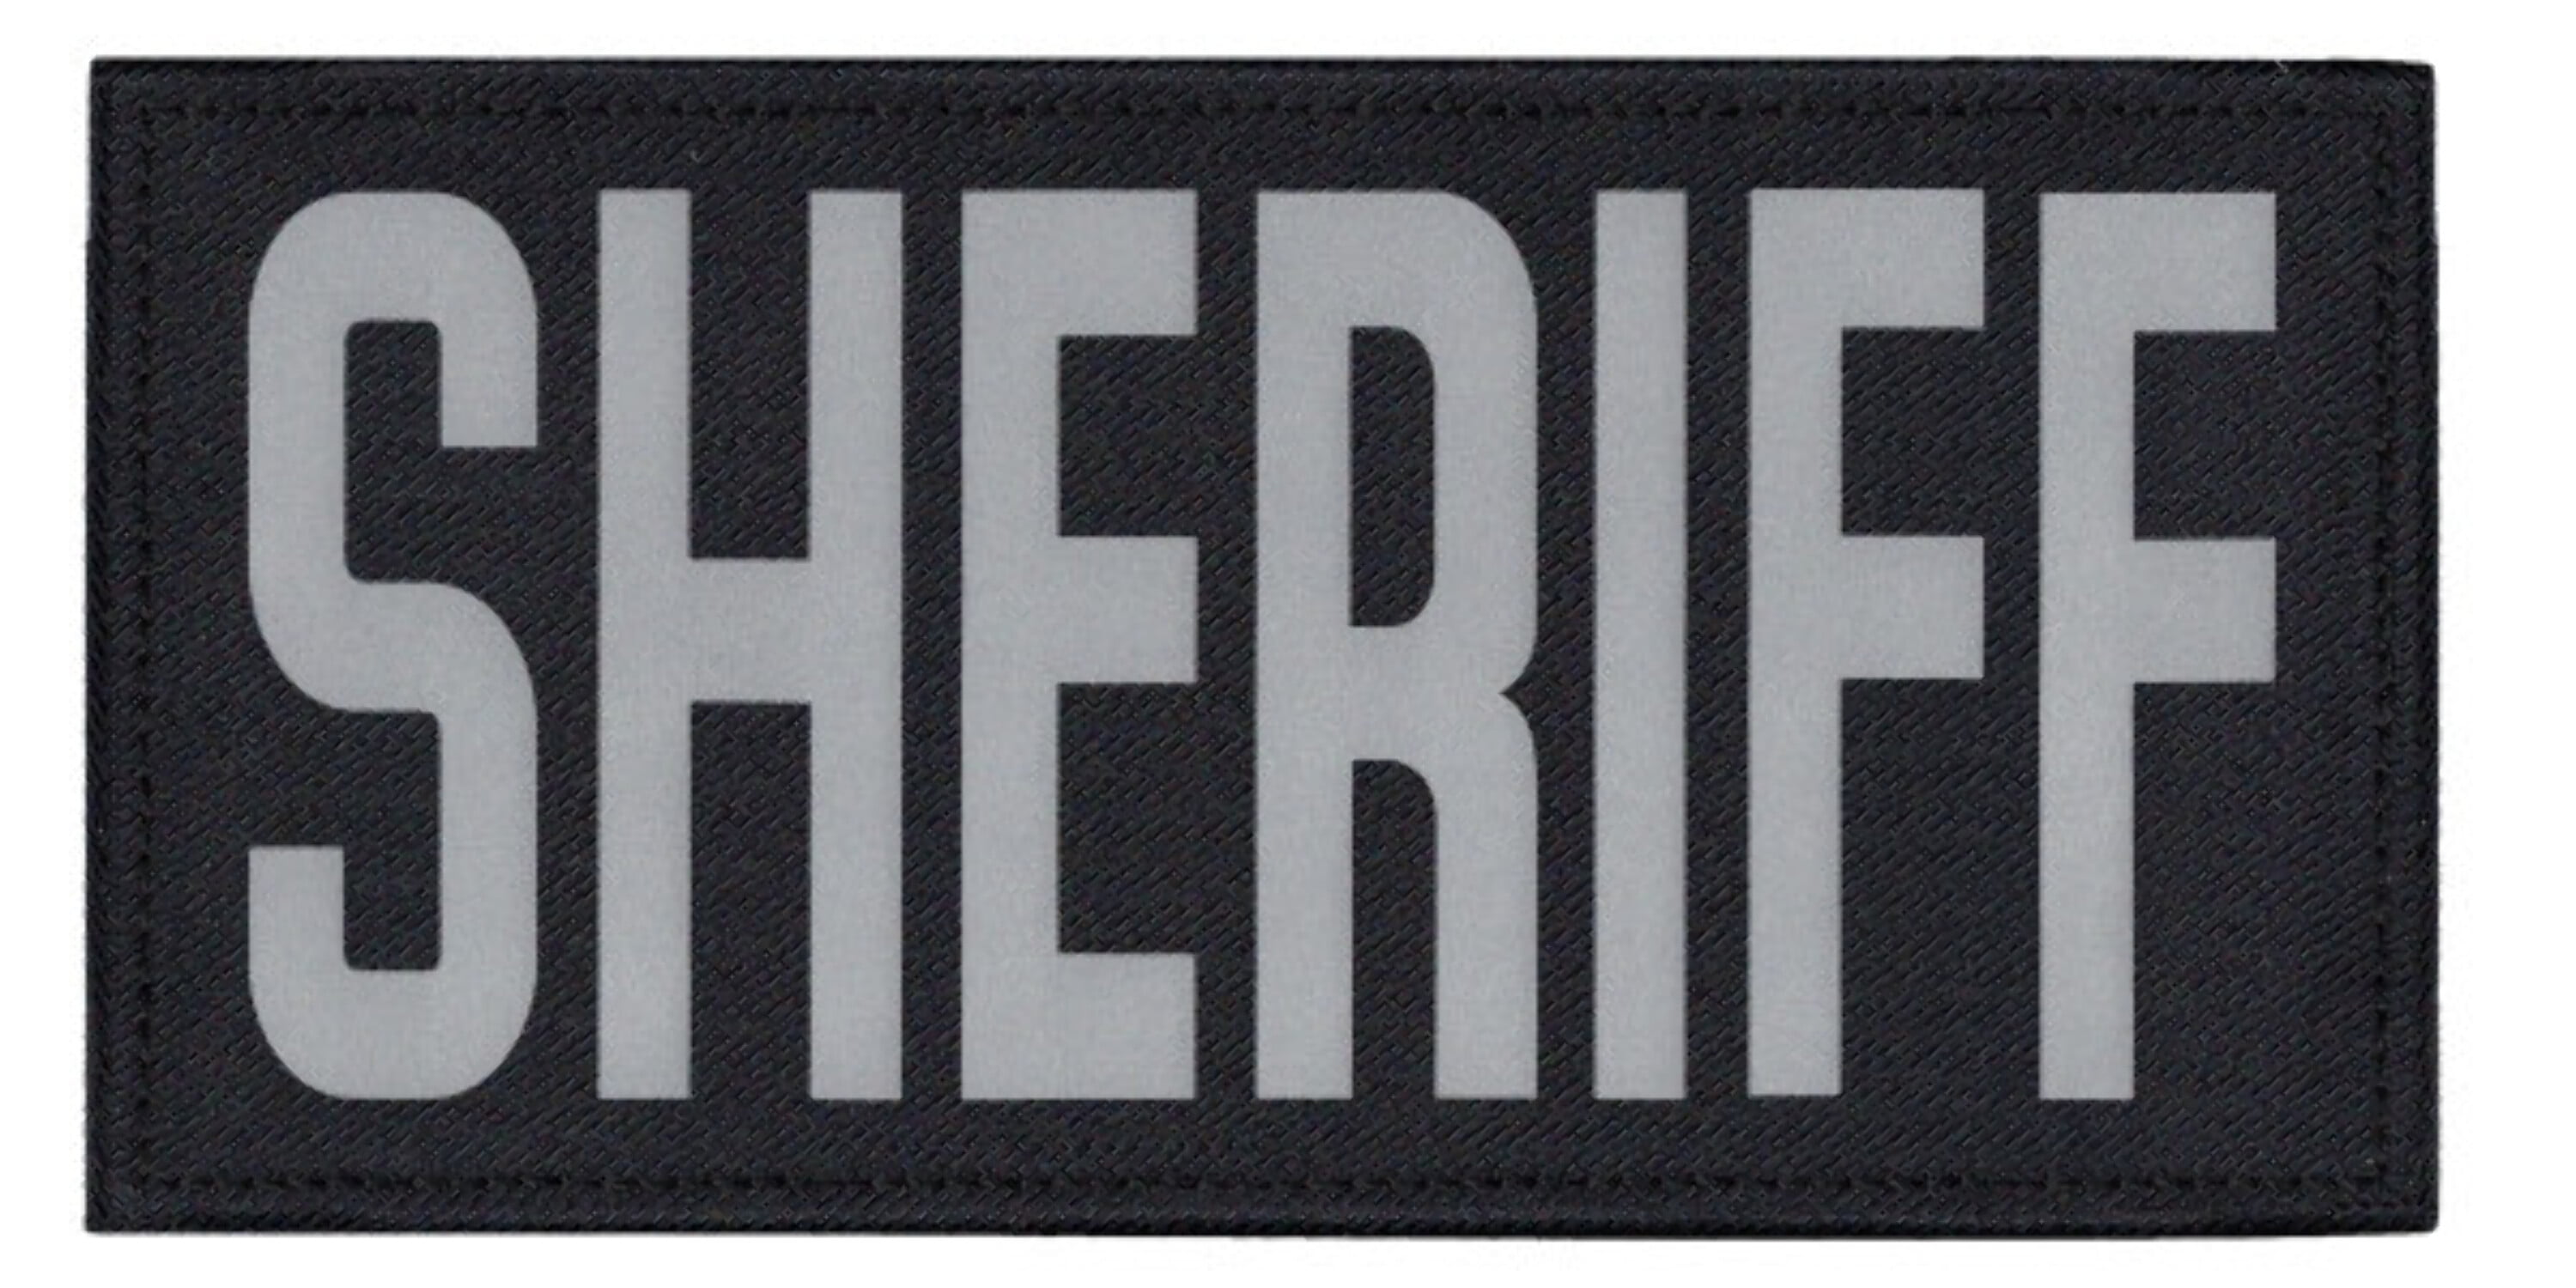 SHERIFF, Back Patch, Printed, Reflective, Hook w/Loop, Tactical,  Silver/Midnight, 11x5-1/2 